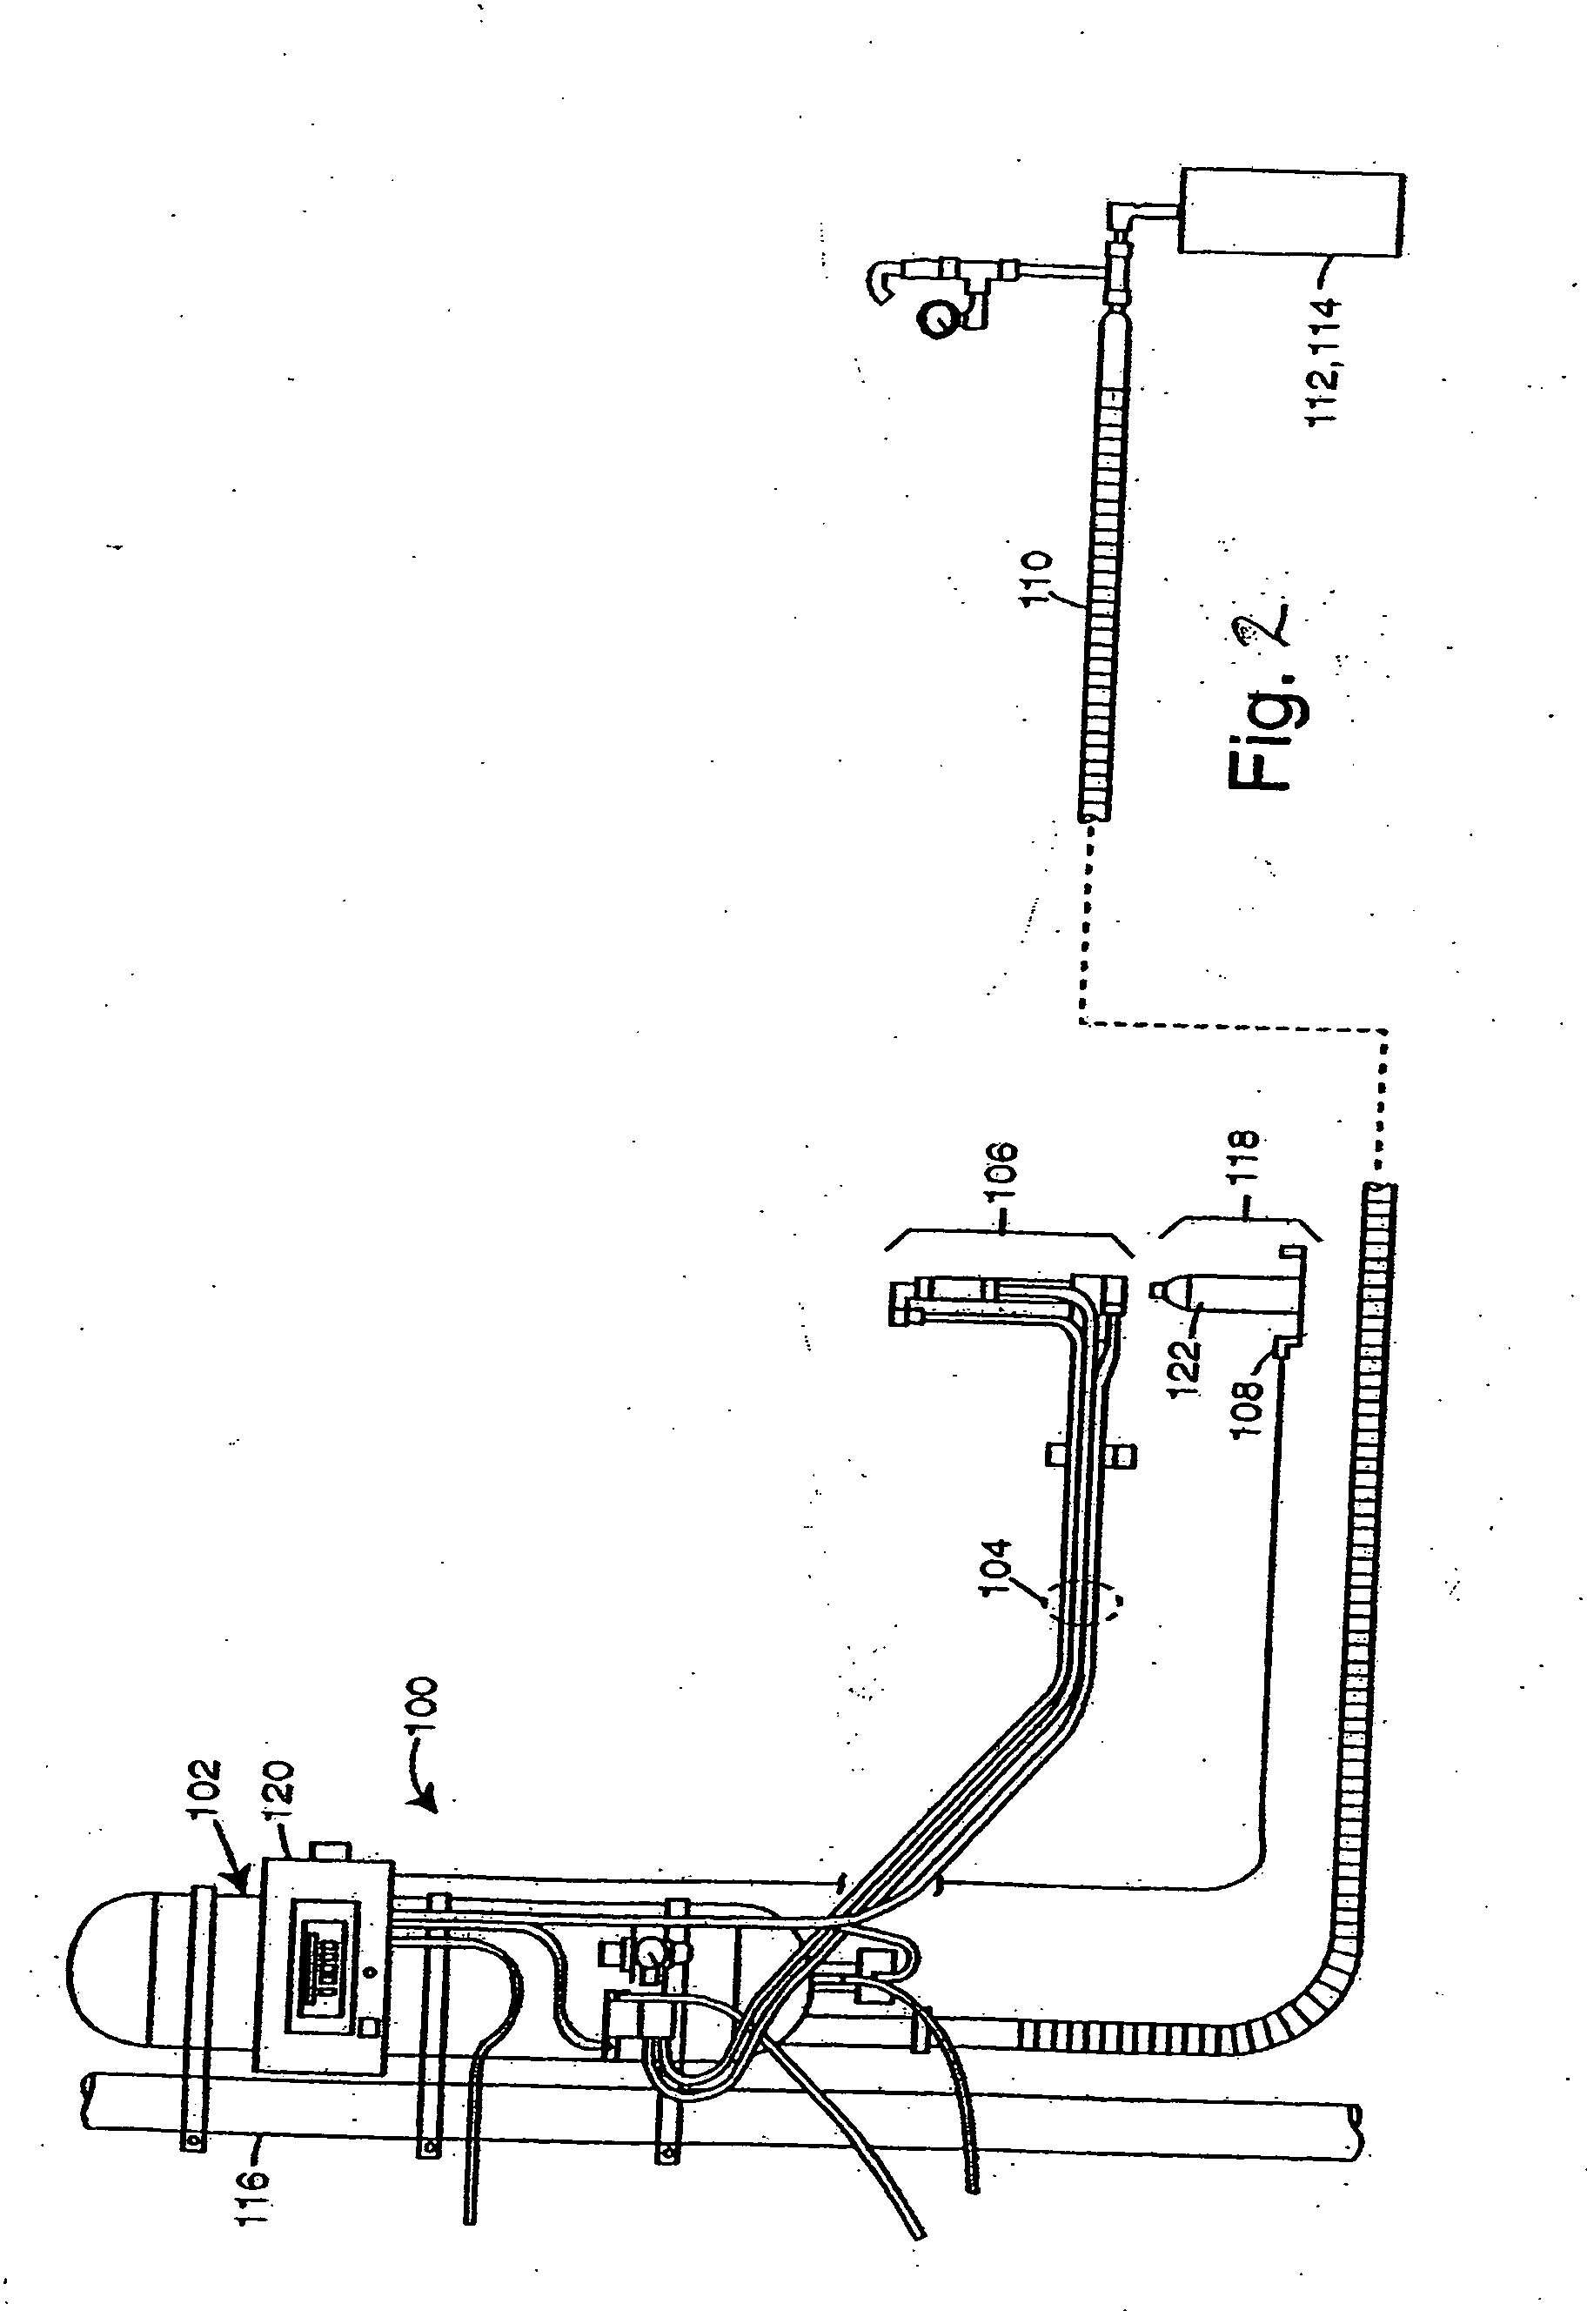 Liquid cryogen dosing system with nozzle for pressurizing and inerting containers